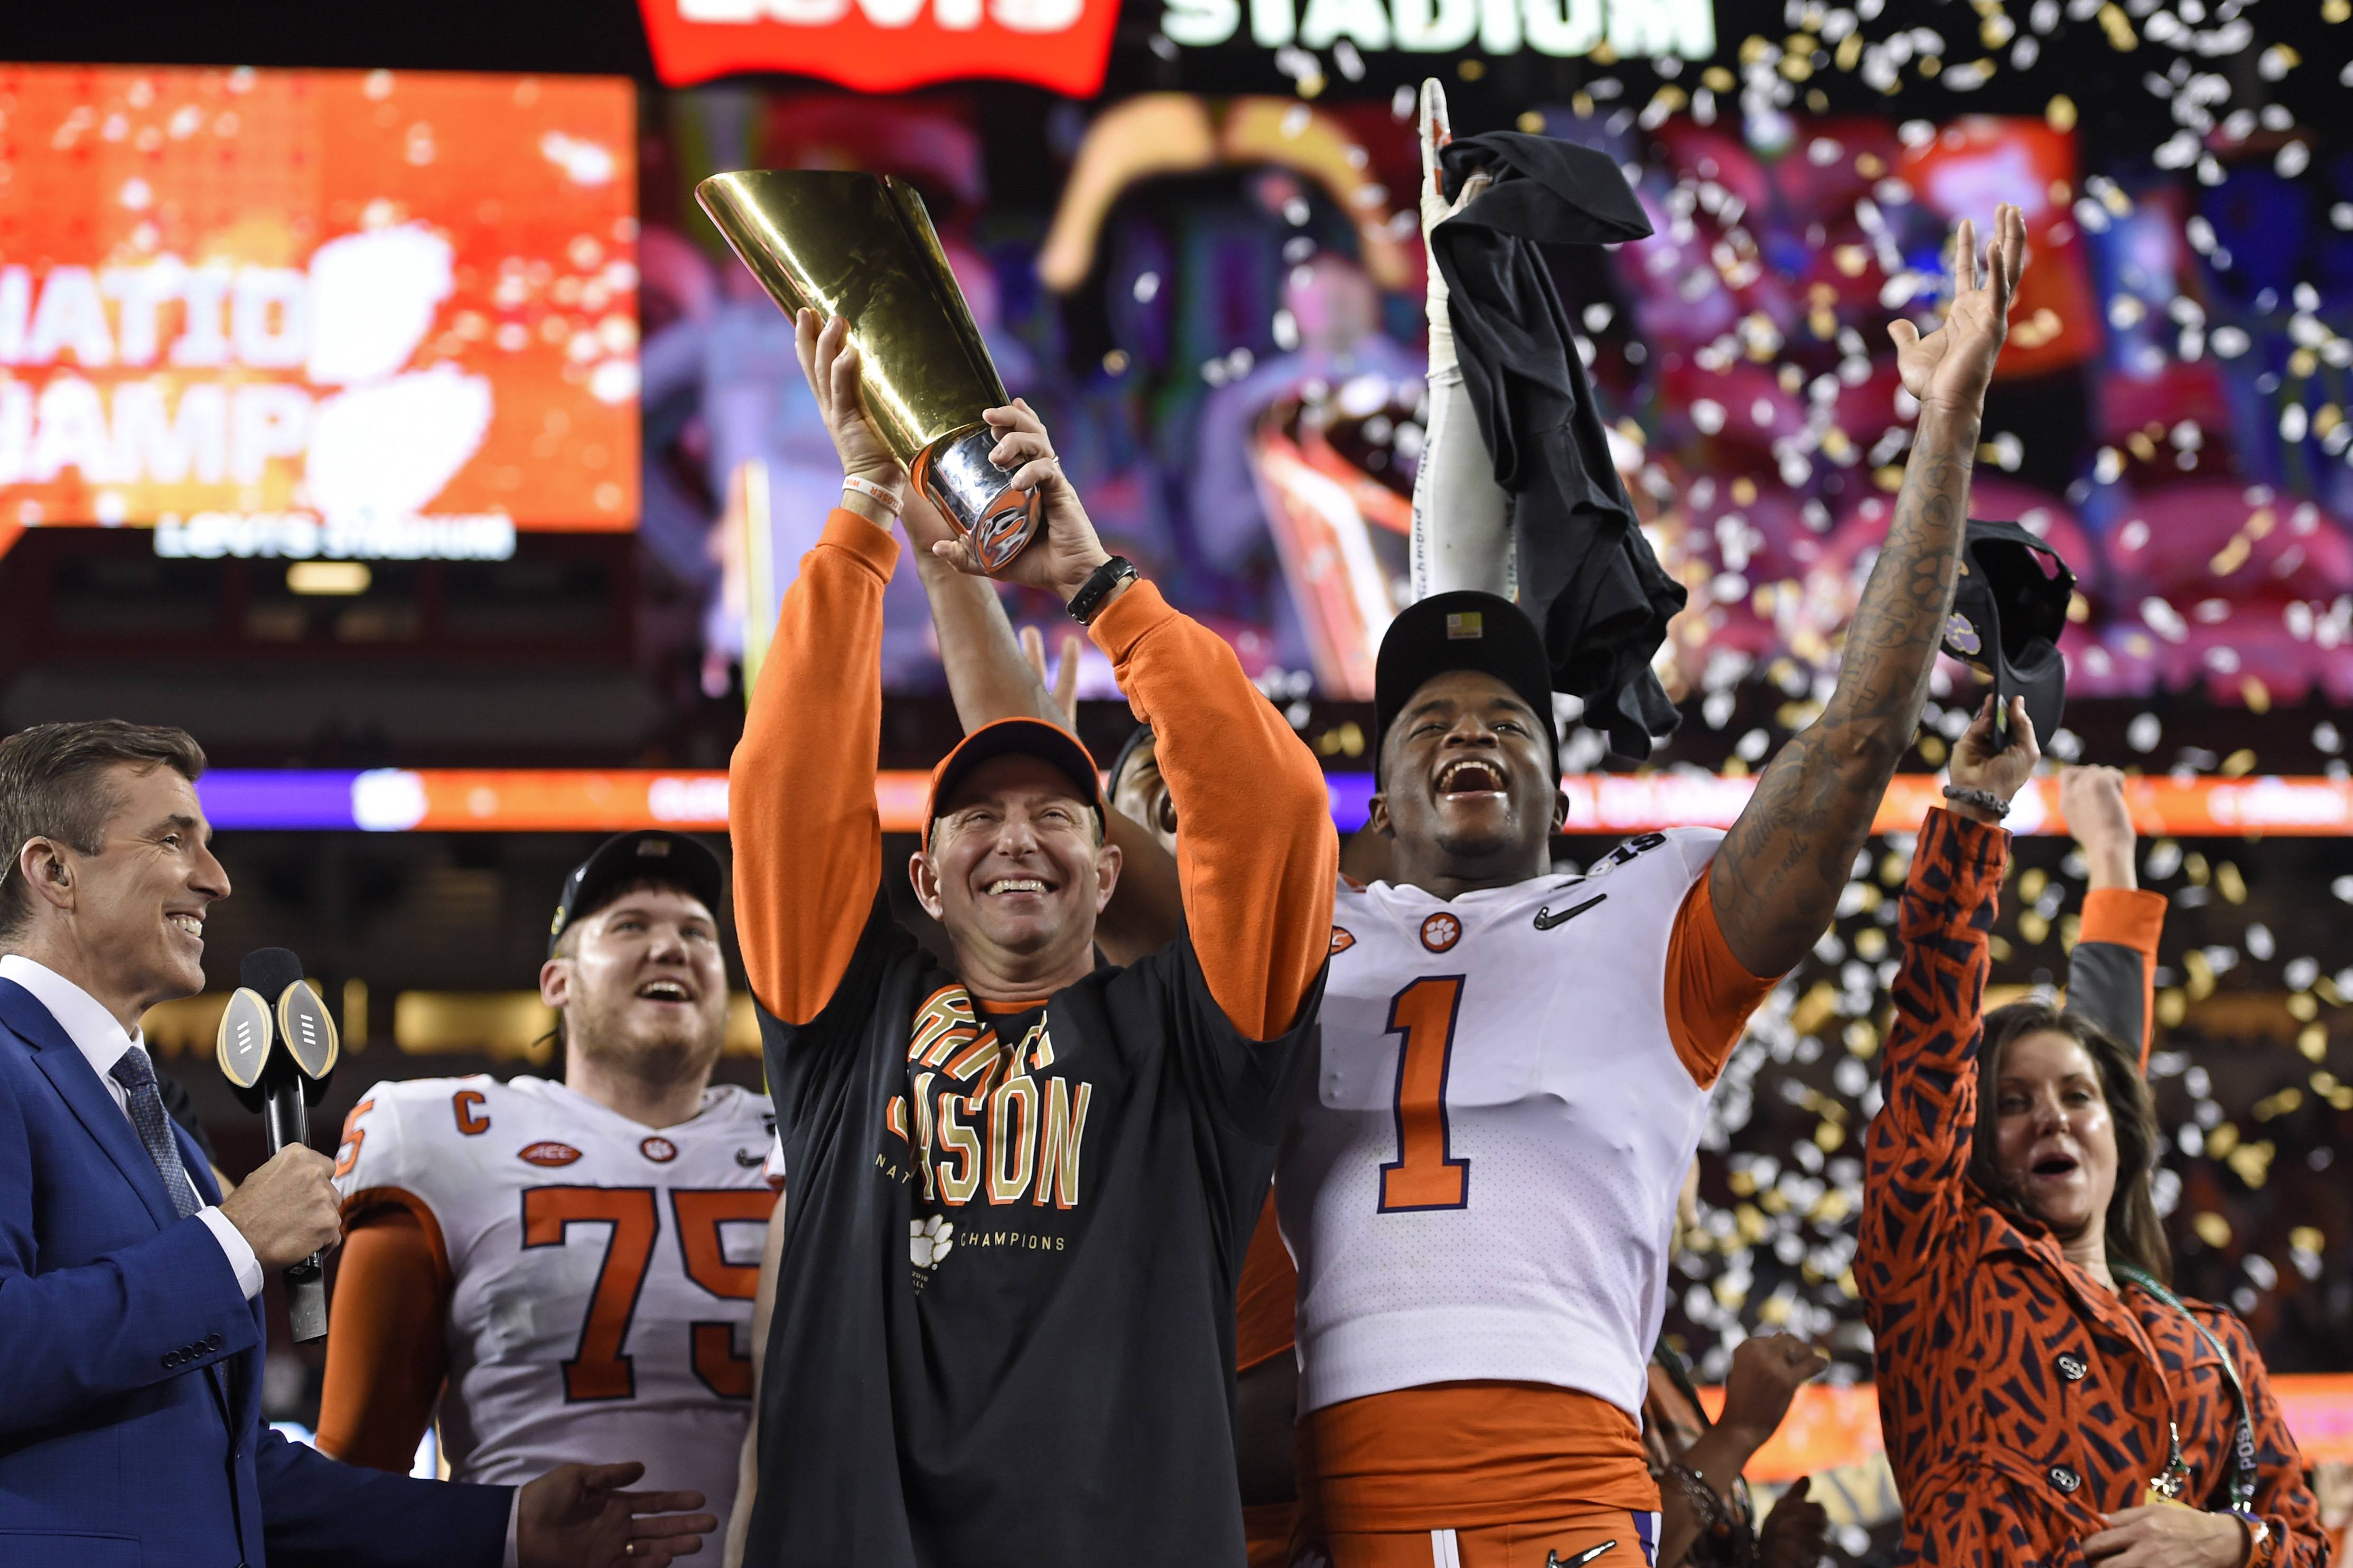 Clemson won the 2019 National Championship in football, and is No. 1 in the 2019 AP Preseason Top 25 Poll. (Image: Bay Area News)